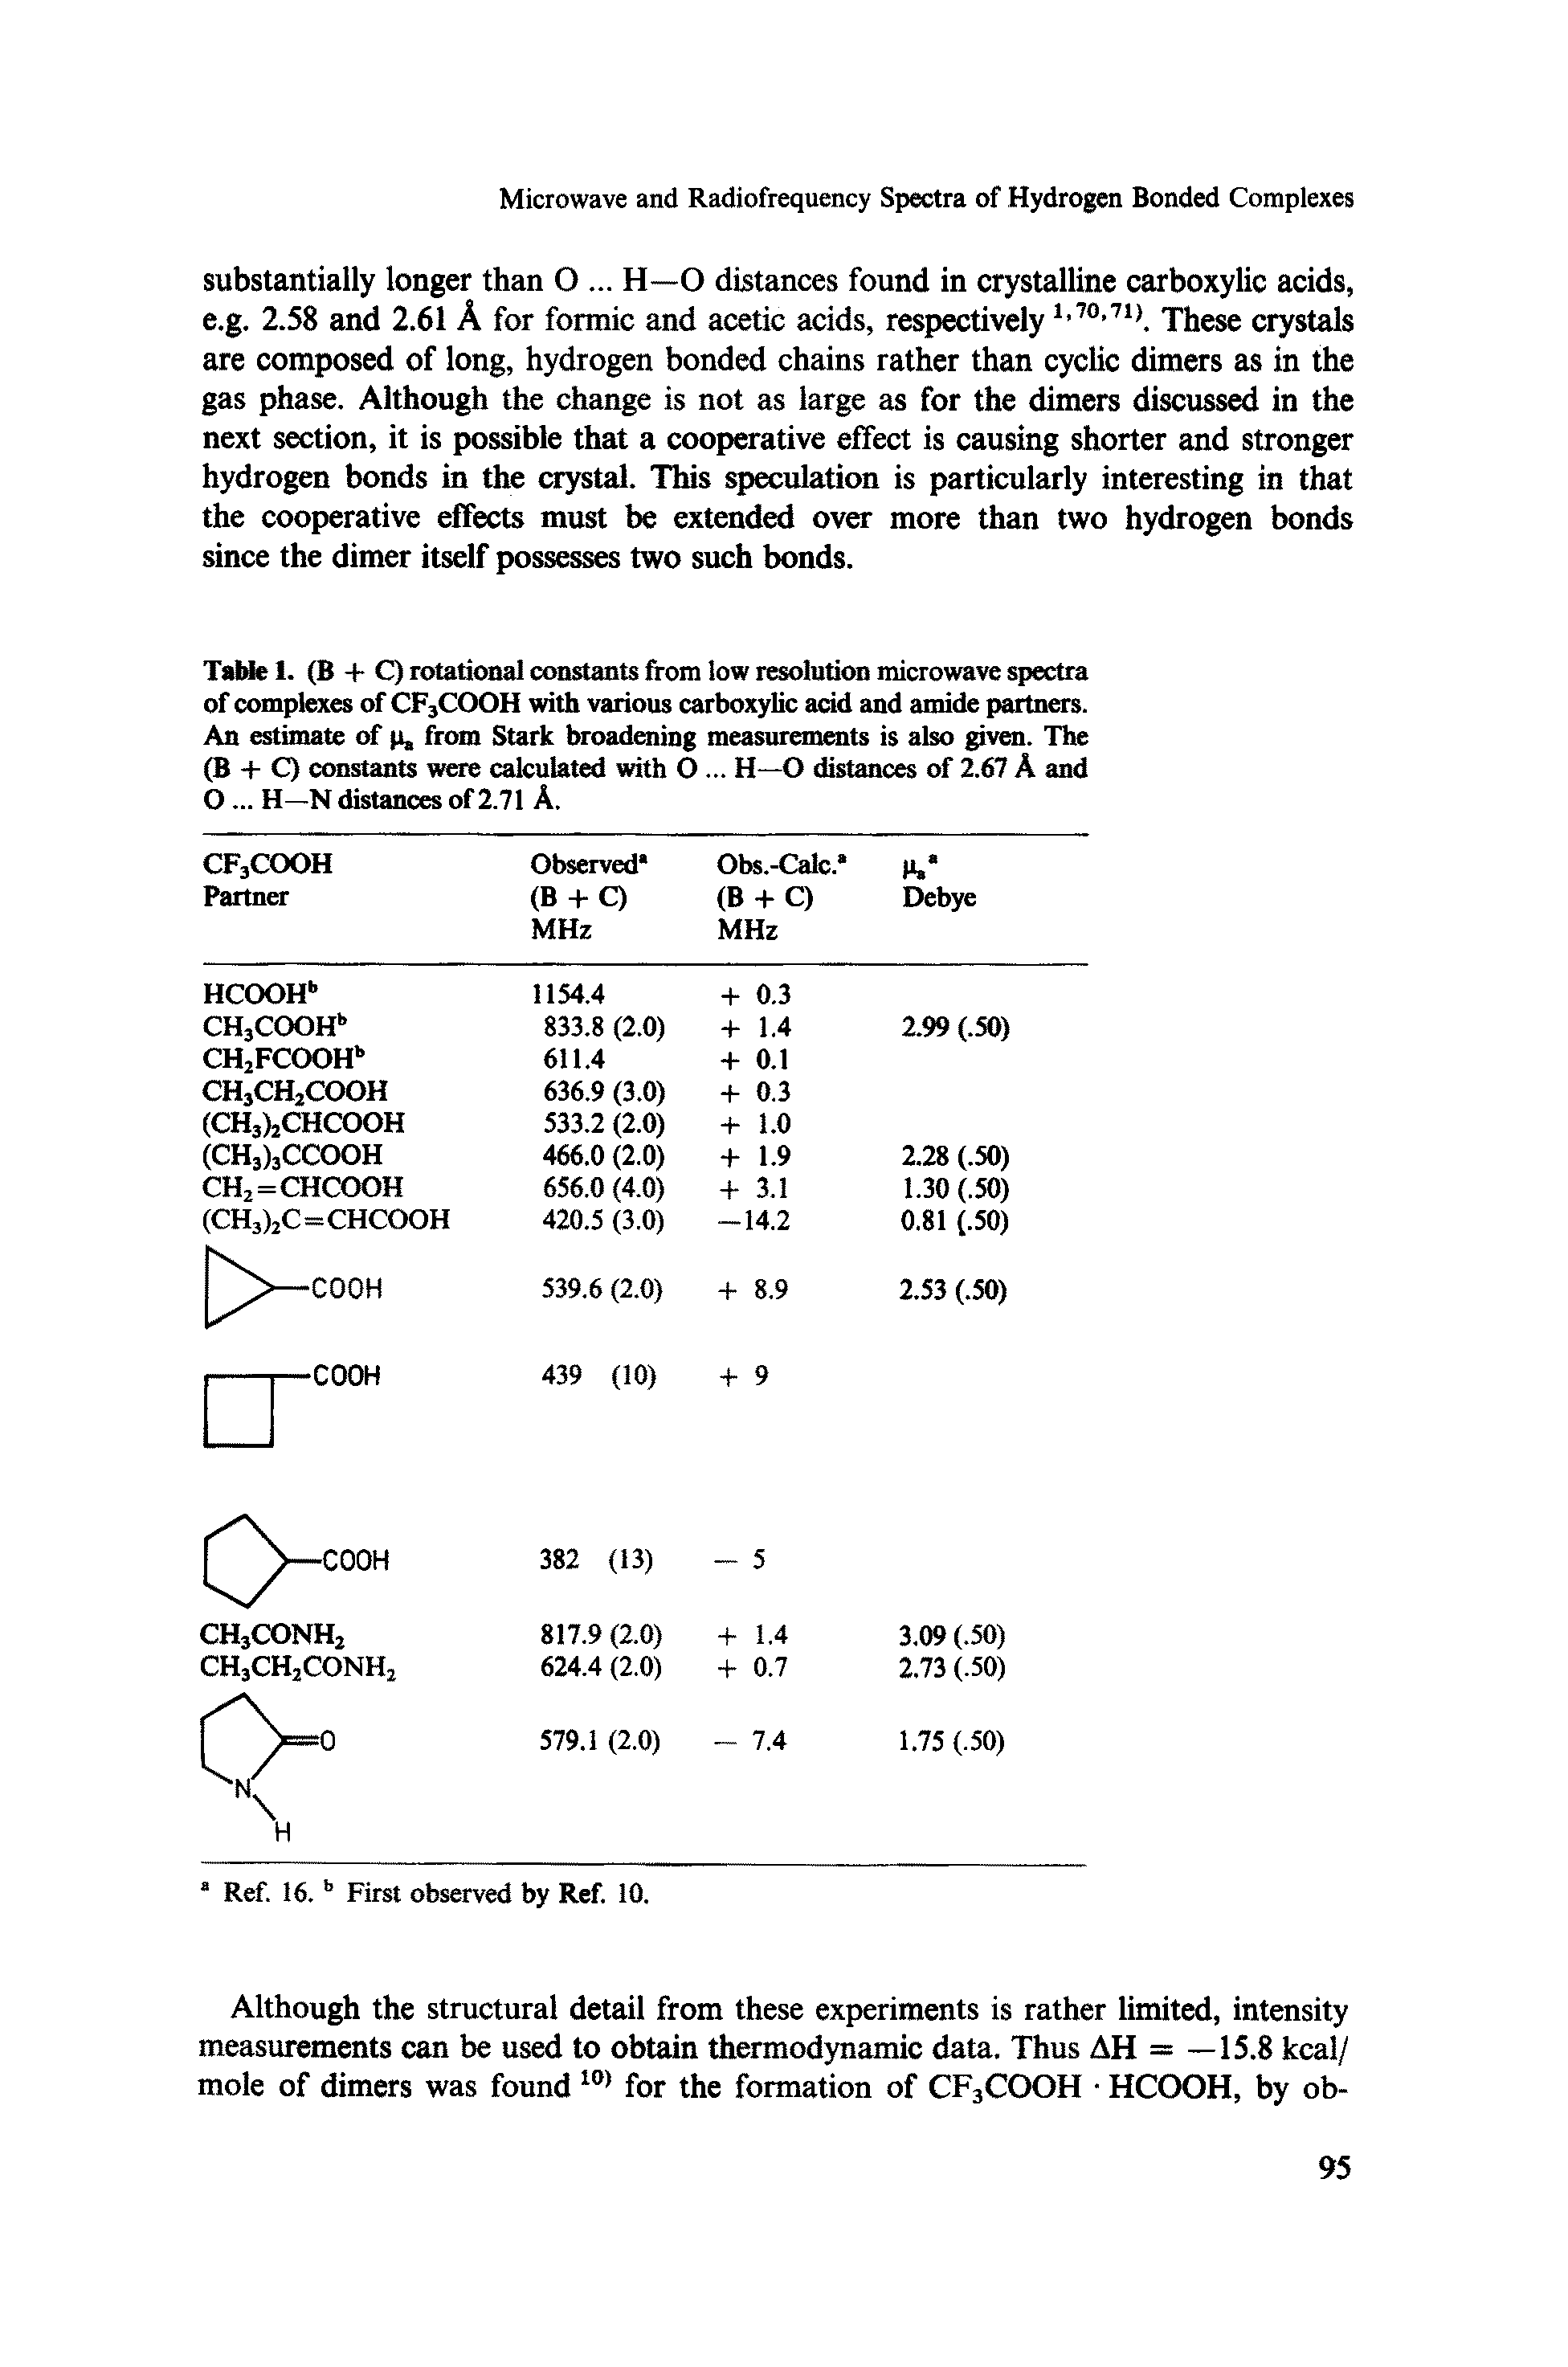 Table 1. (B + C) rotational constants from low resolution microwave spectra of complexes of CF3COOH with various carboxylic acid and amide partners. An estimate of p, from Stark broadening measurements is also given. The (B + Q constants were calculated with O. .. H—O distances of 2.67 A and O. .. H—N distances of 2.71 A.